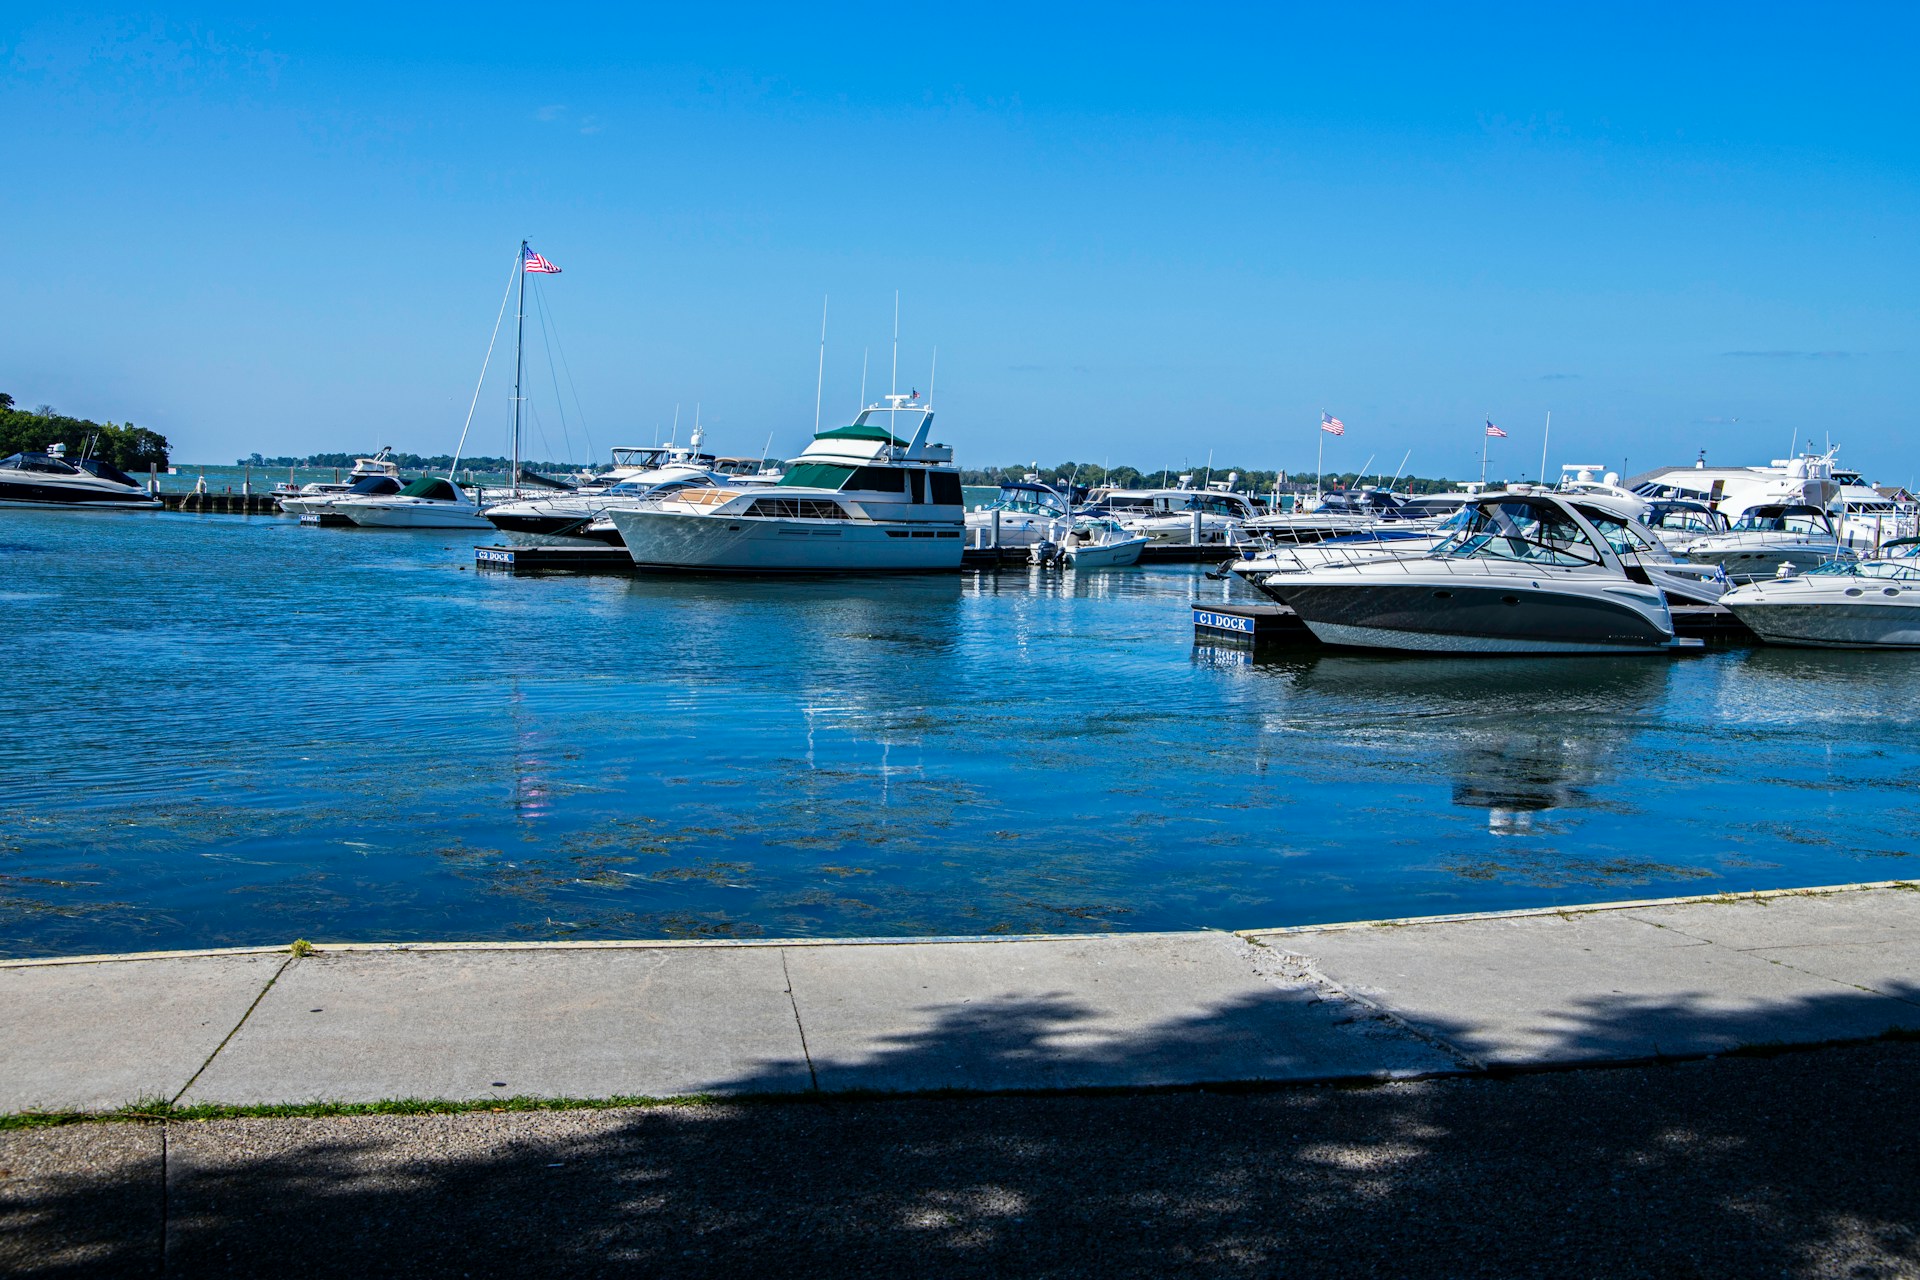 Boats docked in the marina at Put-in-Bay on the shores of Lake Erie, South Bass Island, Ohio, USA